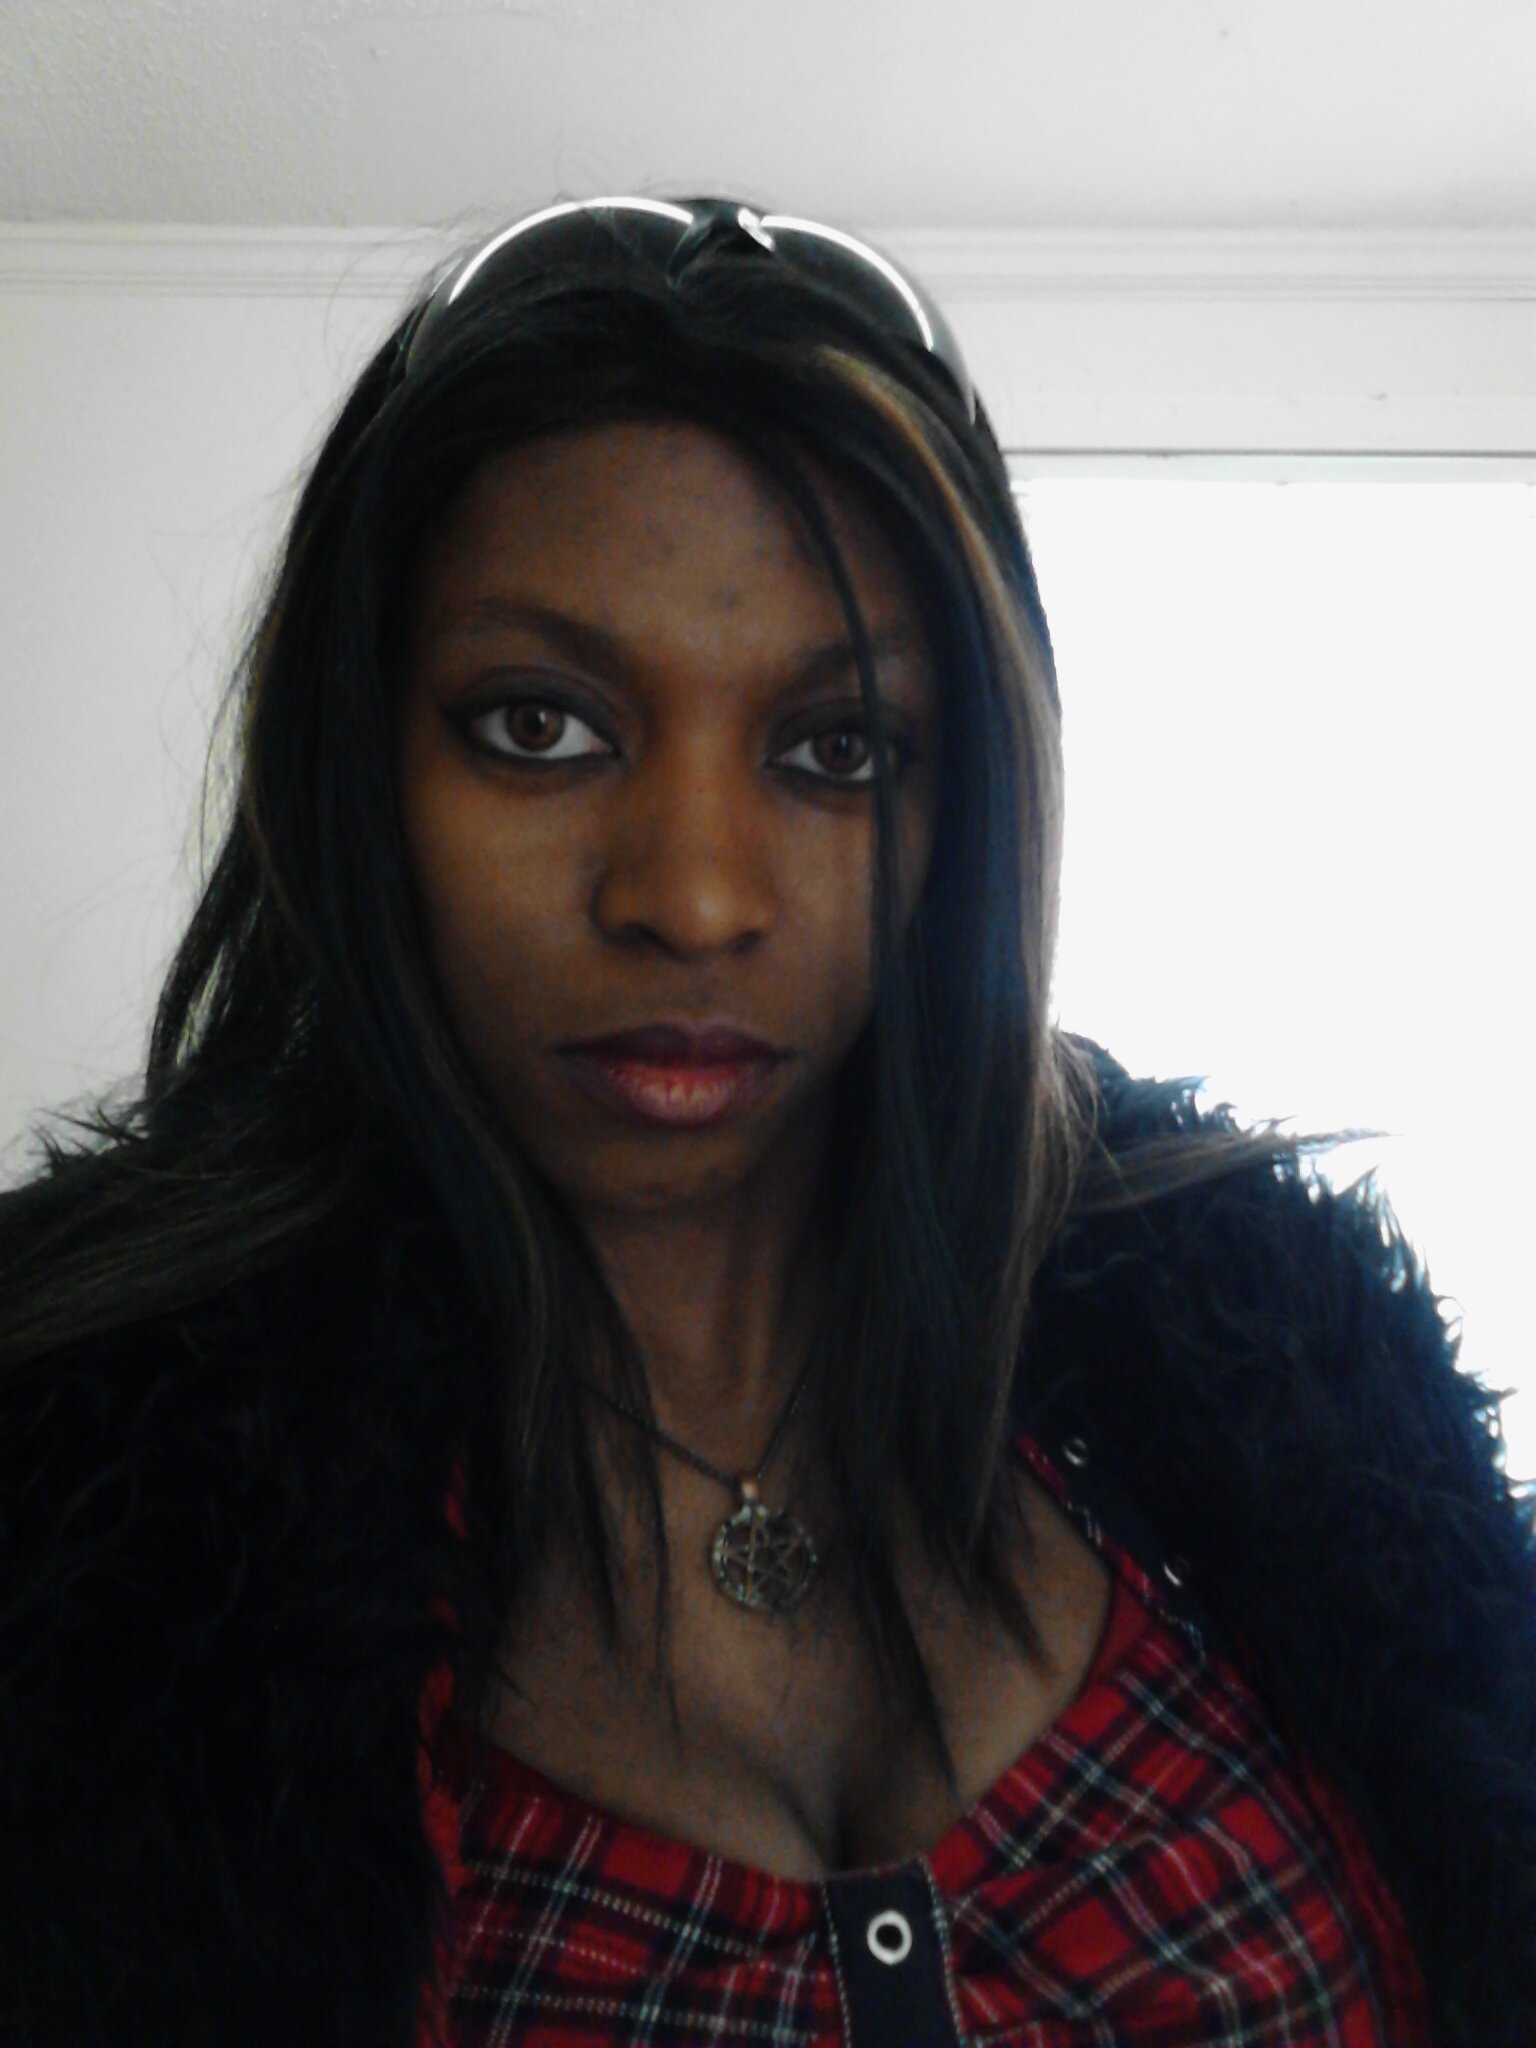 Actress, Model, Singer, Furry, and Convention Costumer/Cosplayer. Also the mind behind Drache Media Films